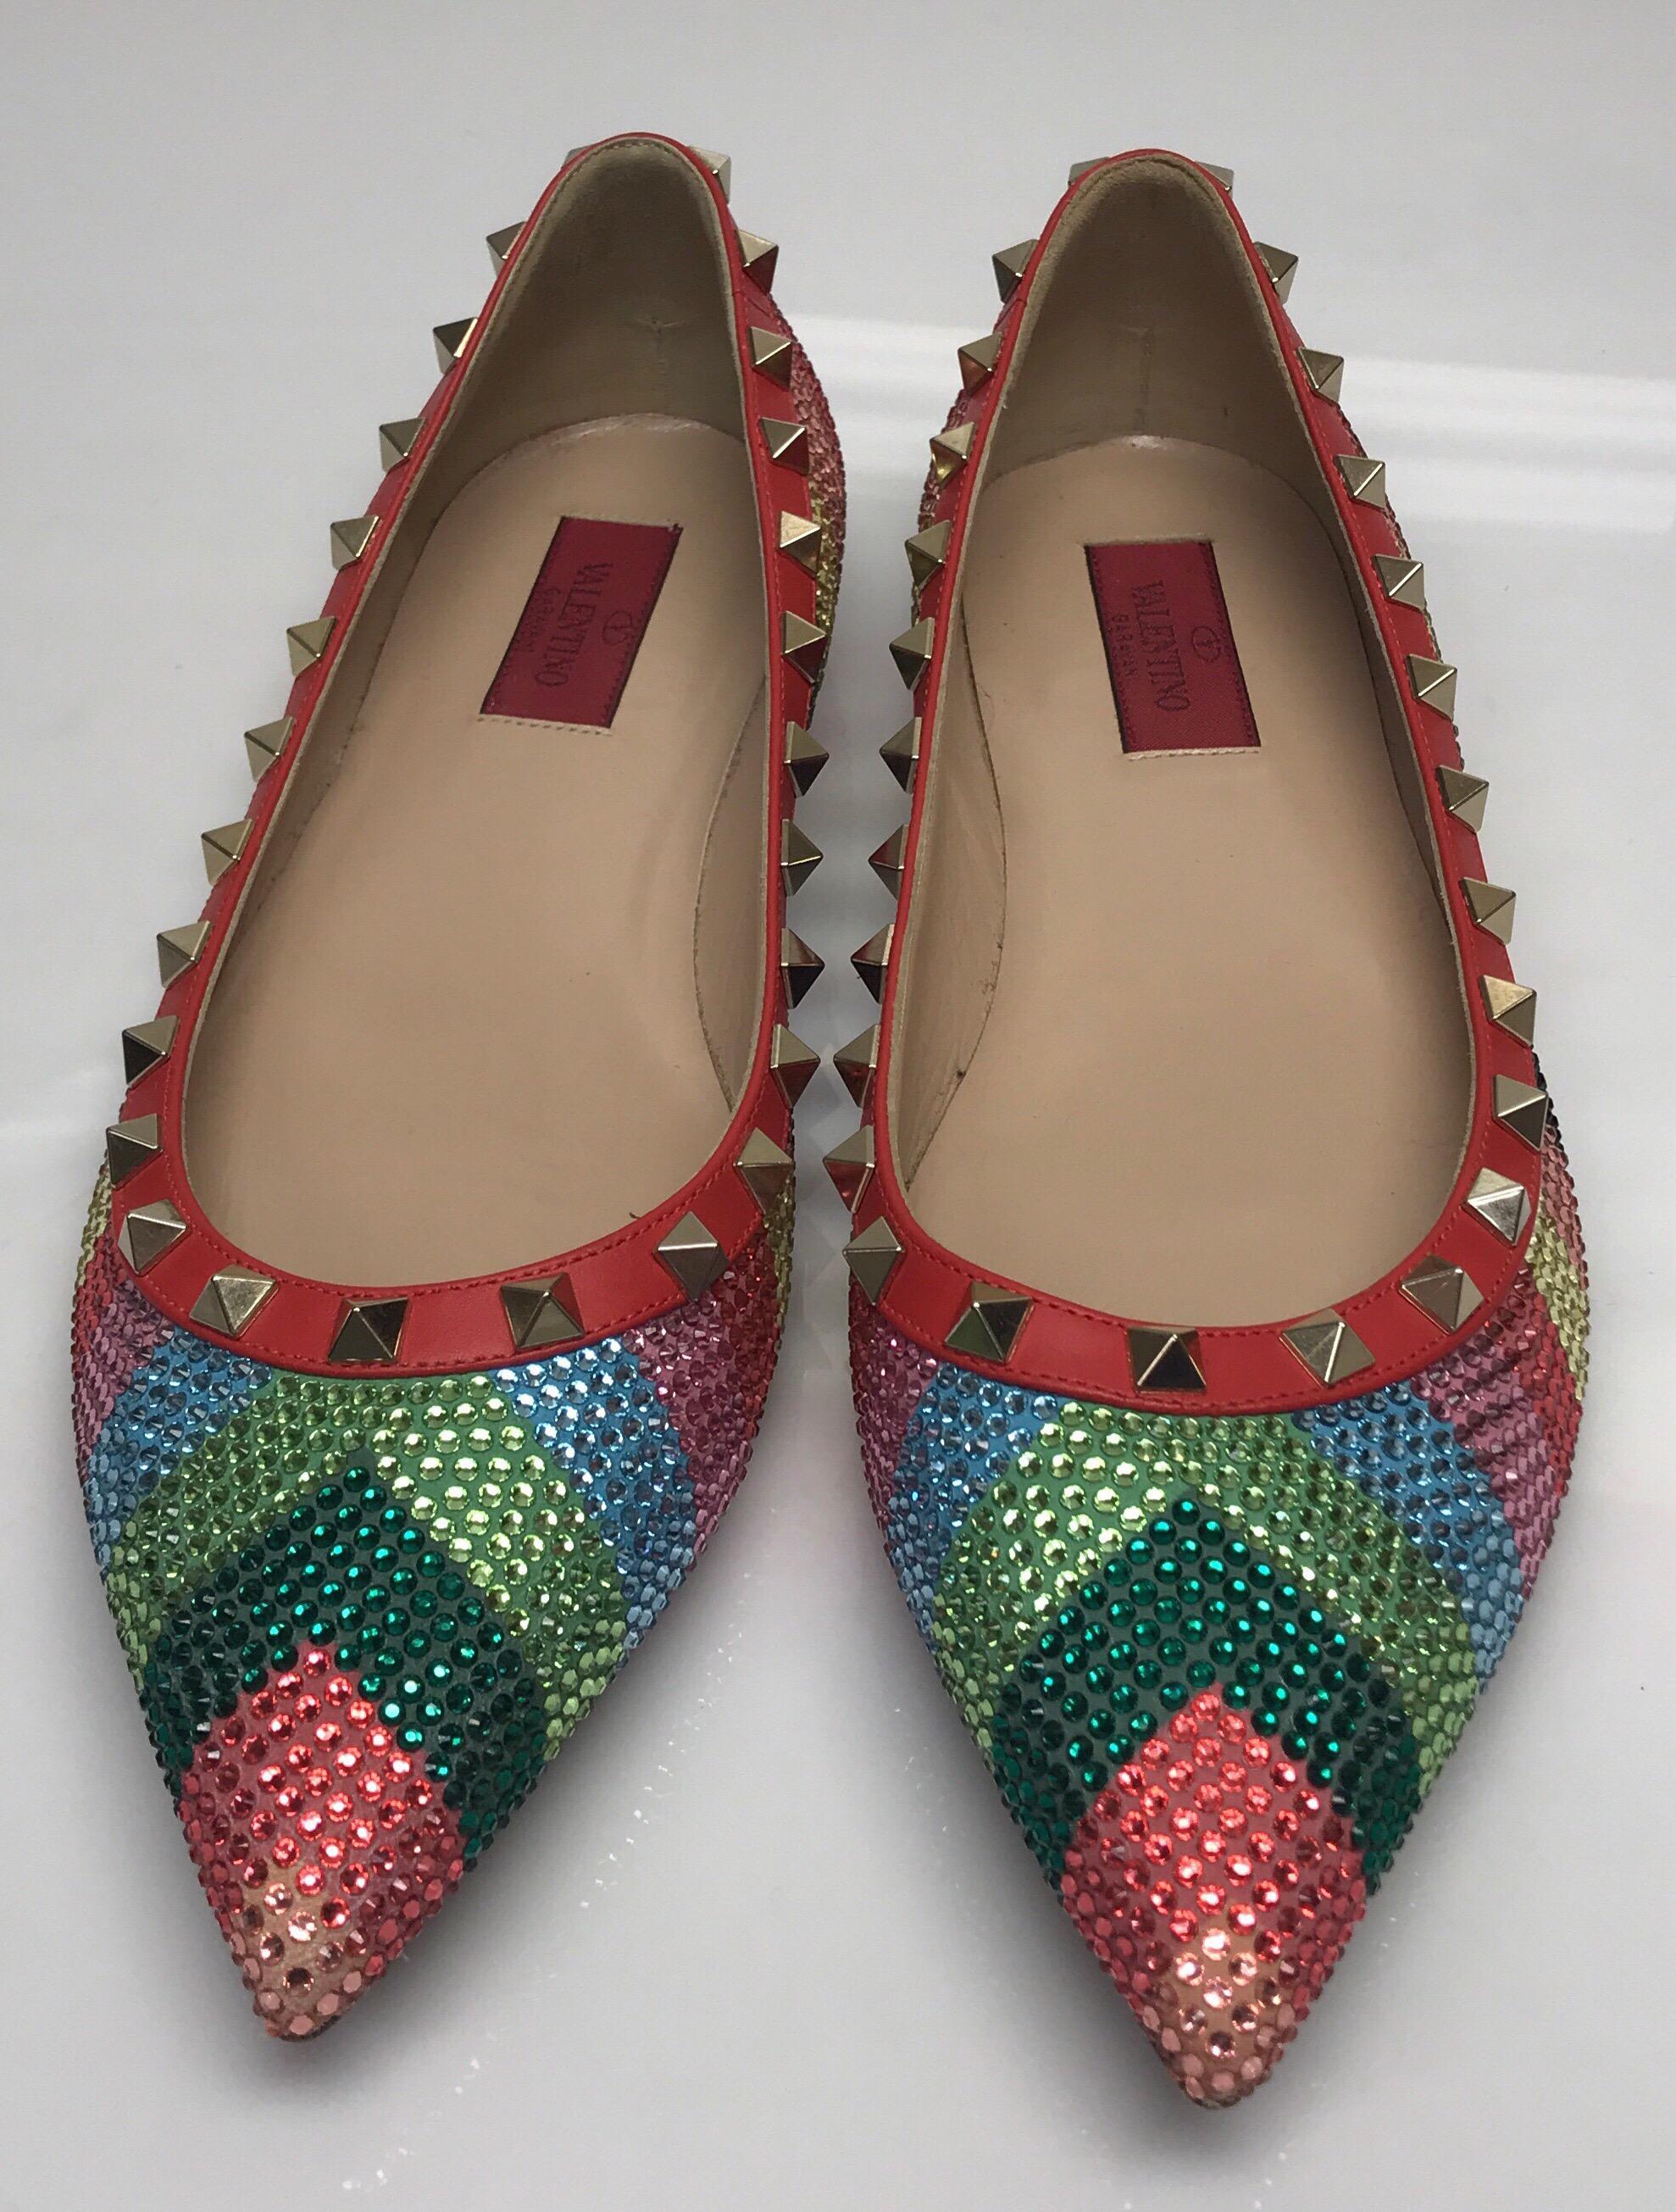 Valentino Multi color iridescent flats w/ studs-39. These amazing Valentino flats are in excellent condition. They show minimal signs of use. They have a multi colored chevron pattern with iridescent rhinestones throughout. There is a red leather